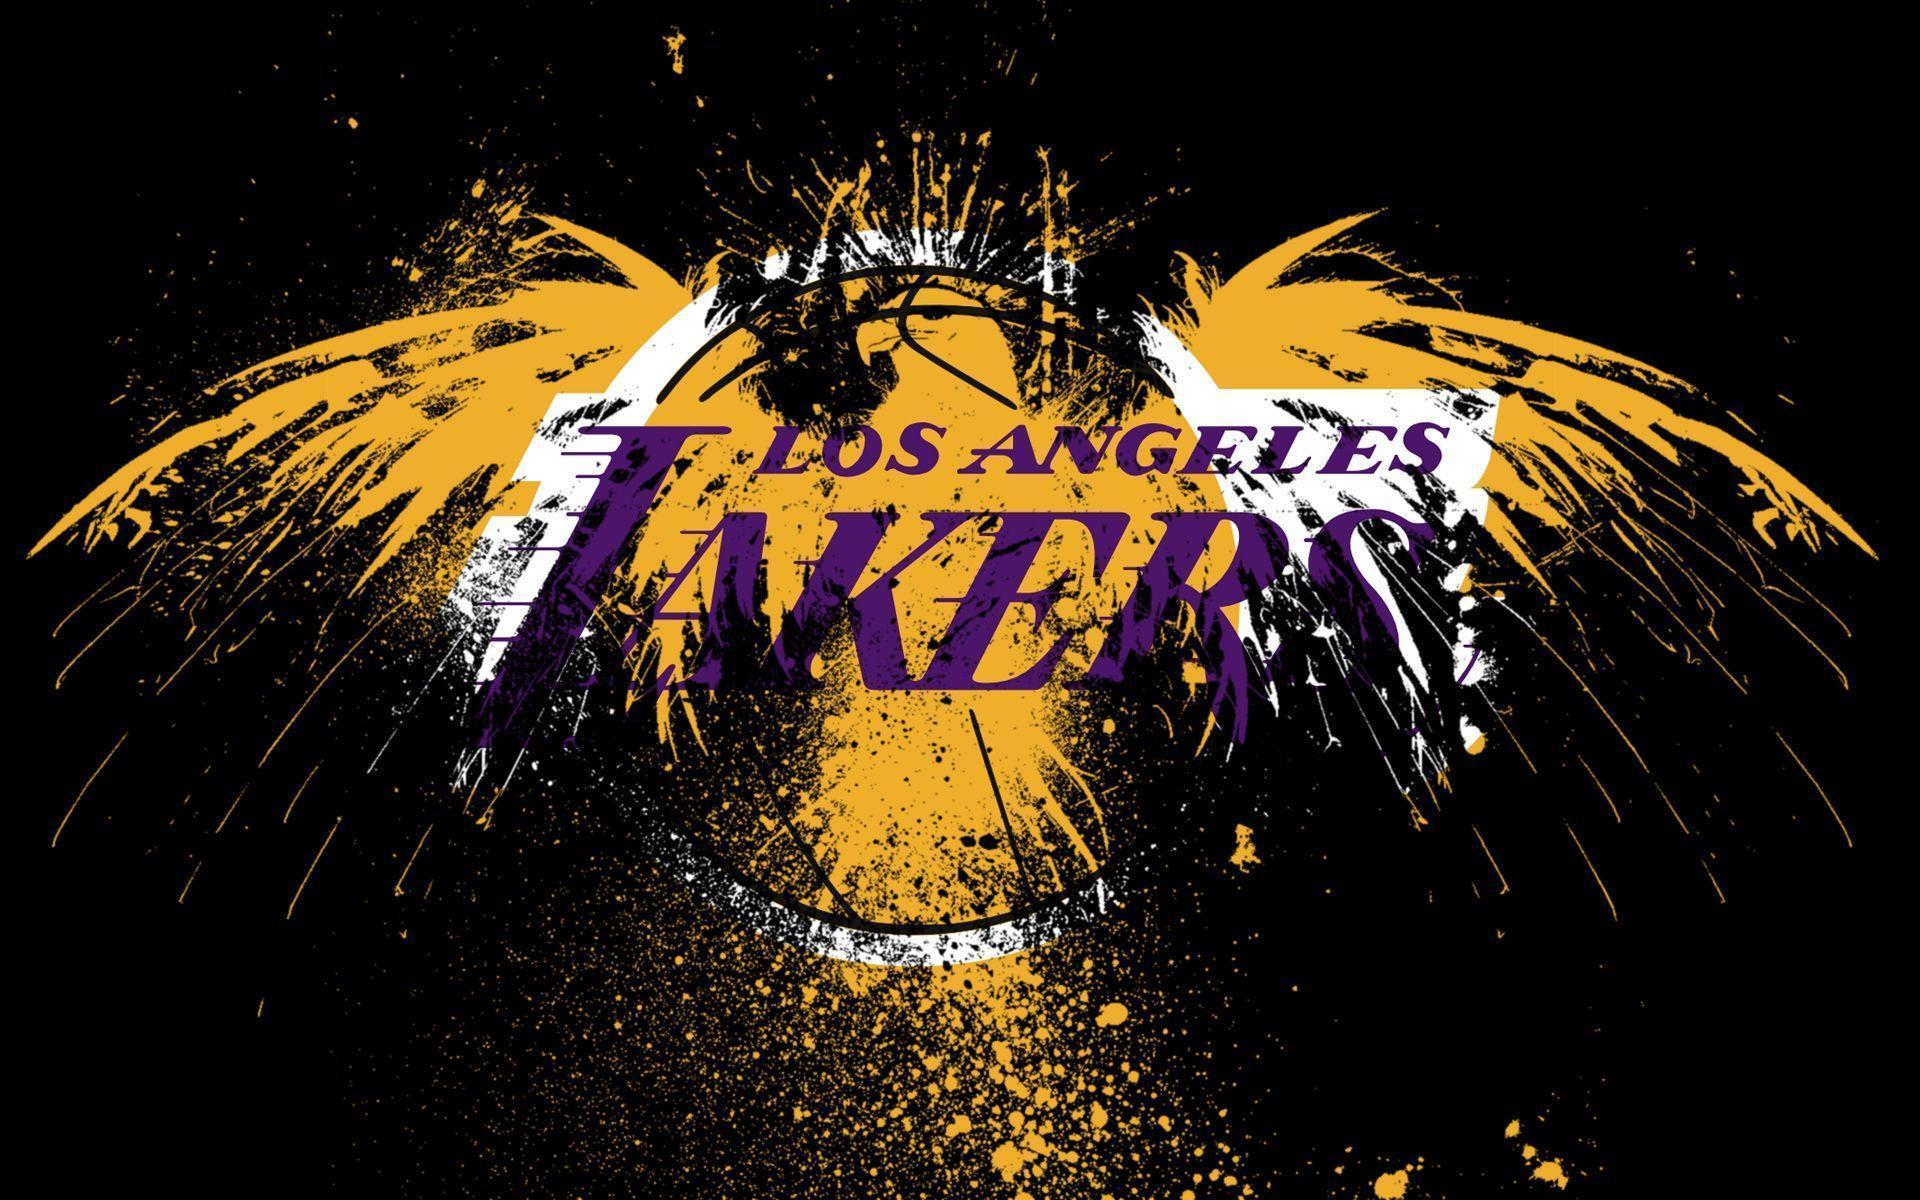 Best image about Lakers. Logos, Magic johnson